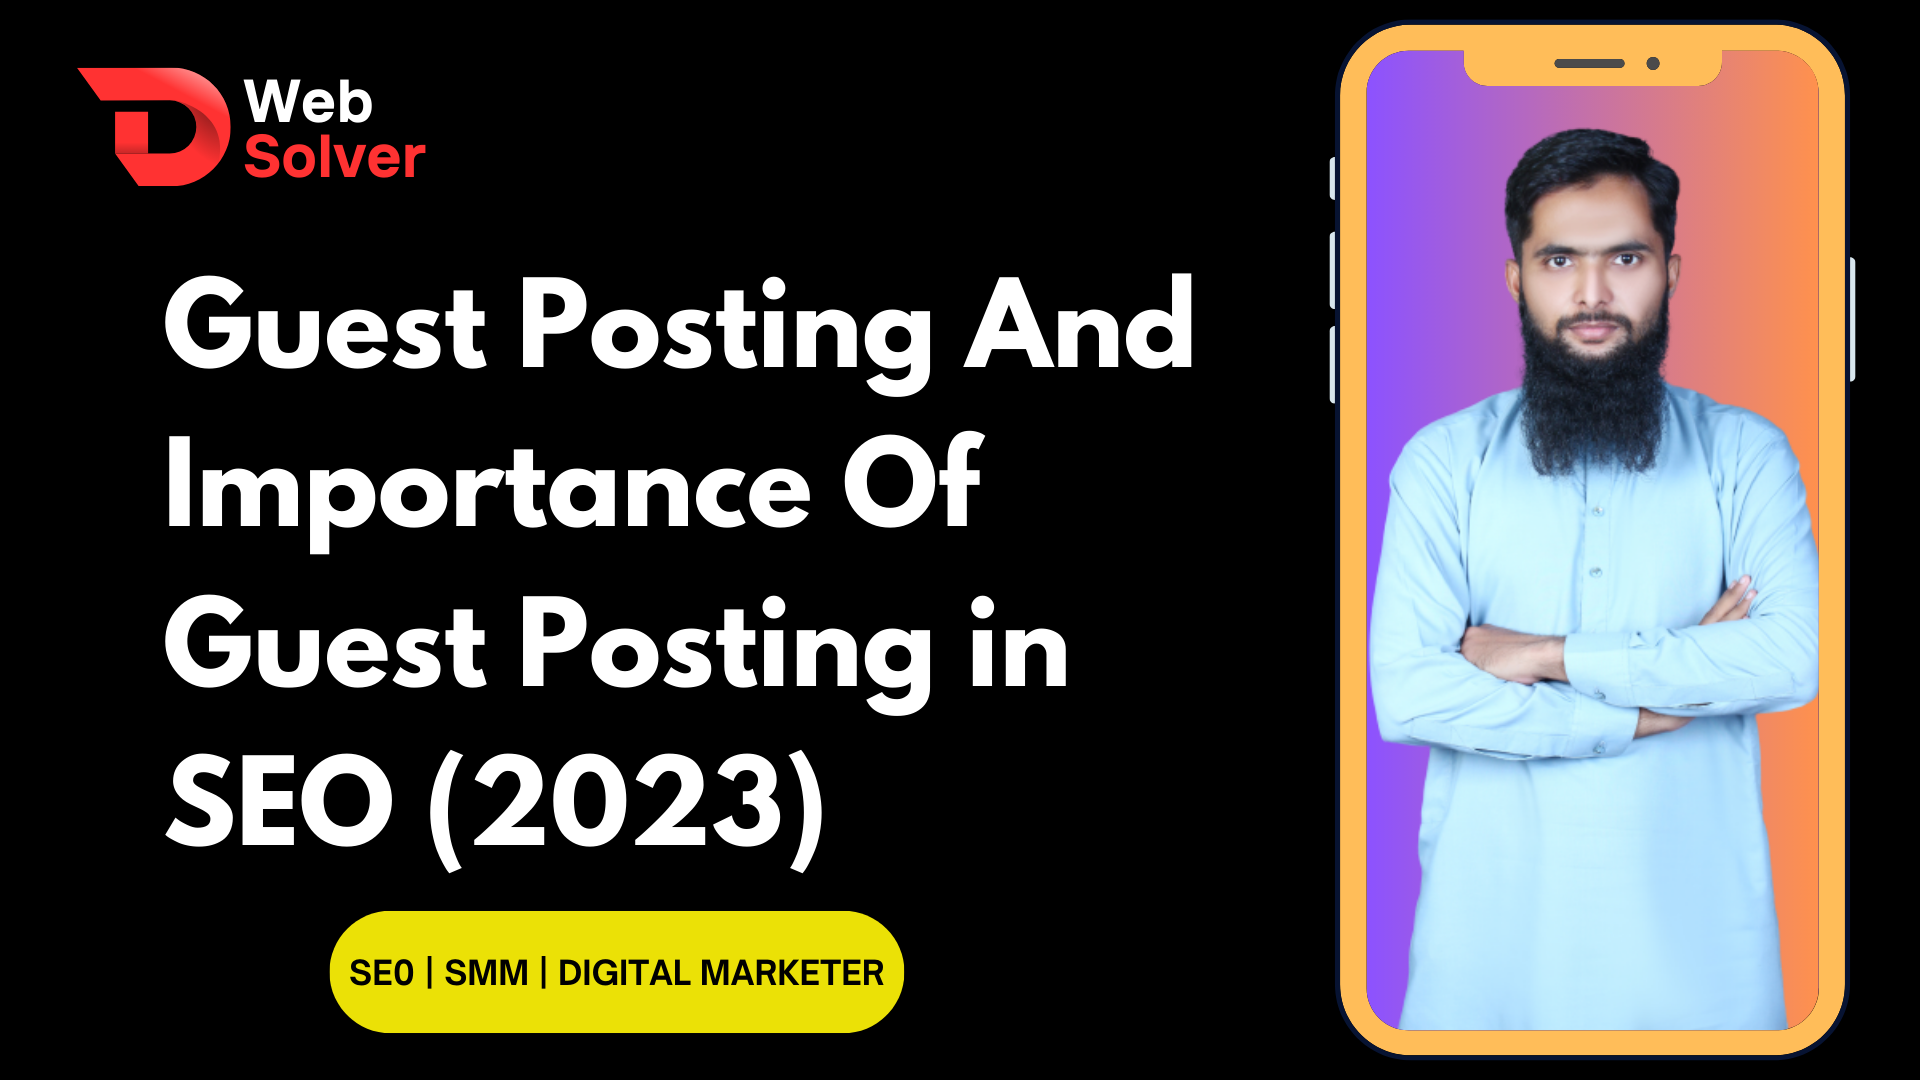 Guest Posting And Importance Of Guest Posting in SEO